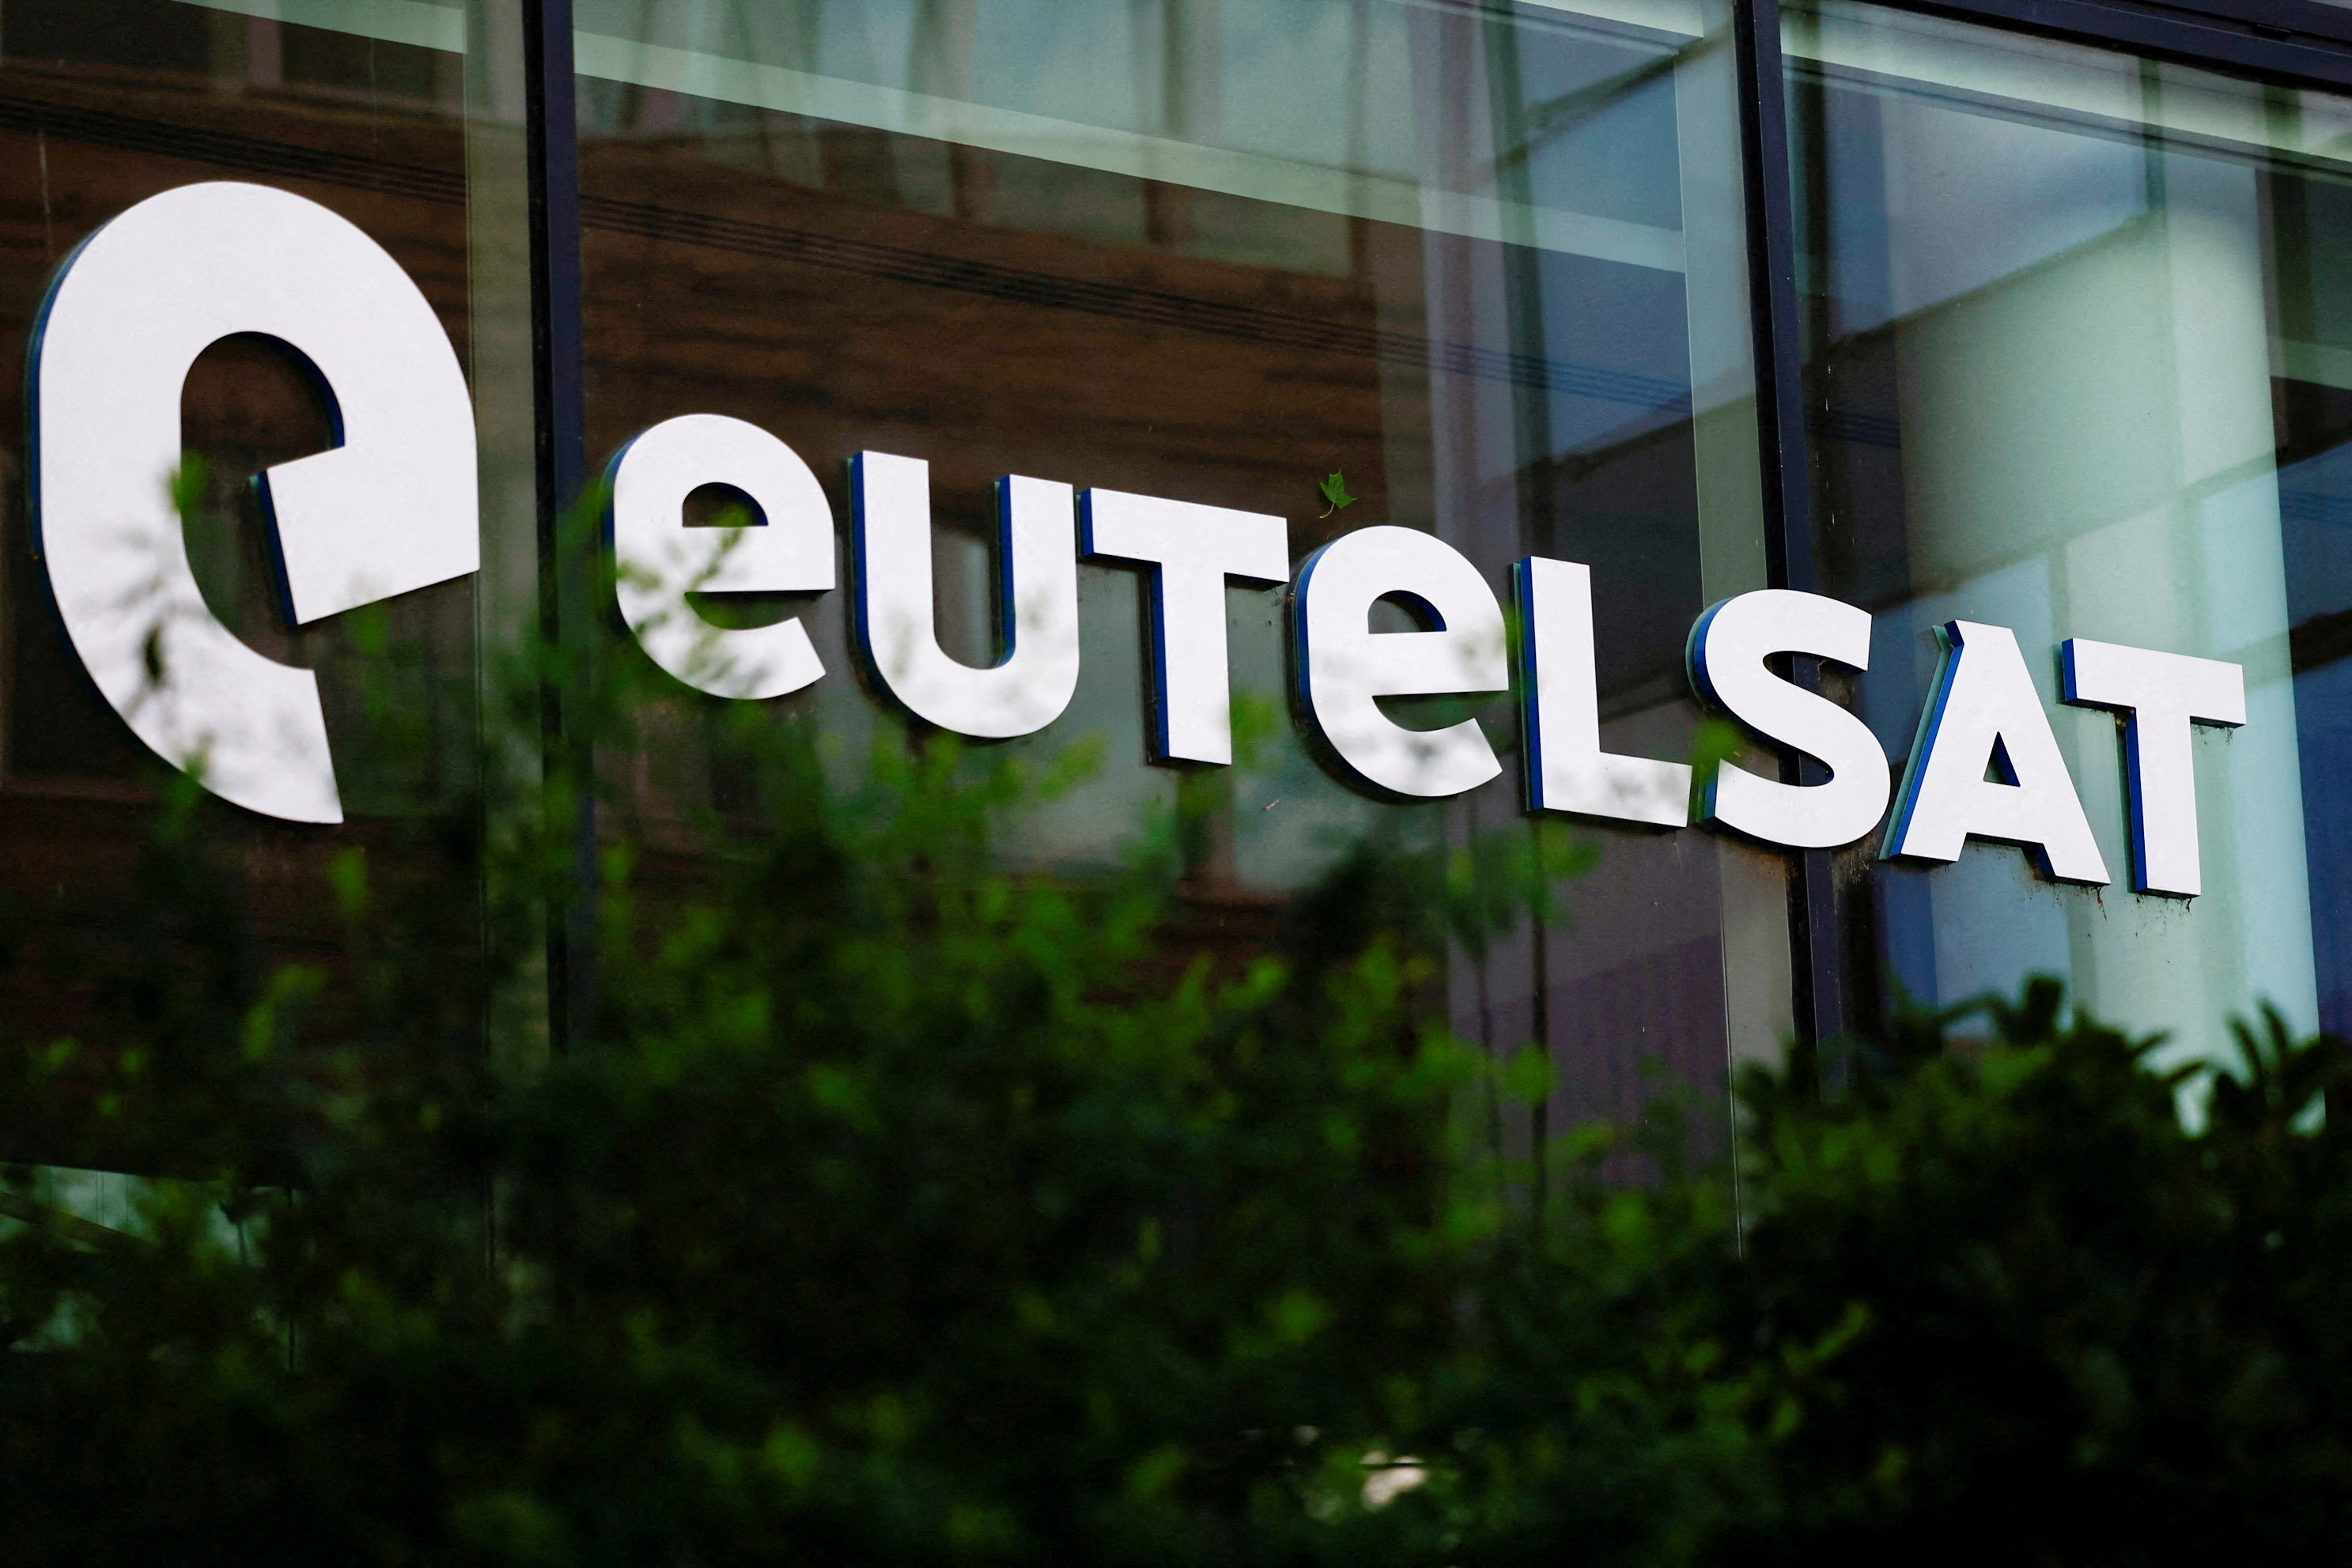 The logo of the European satellite operator Eutelsat is pictured at the company's headquarters in Issy-les-Moulineaux